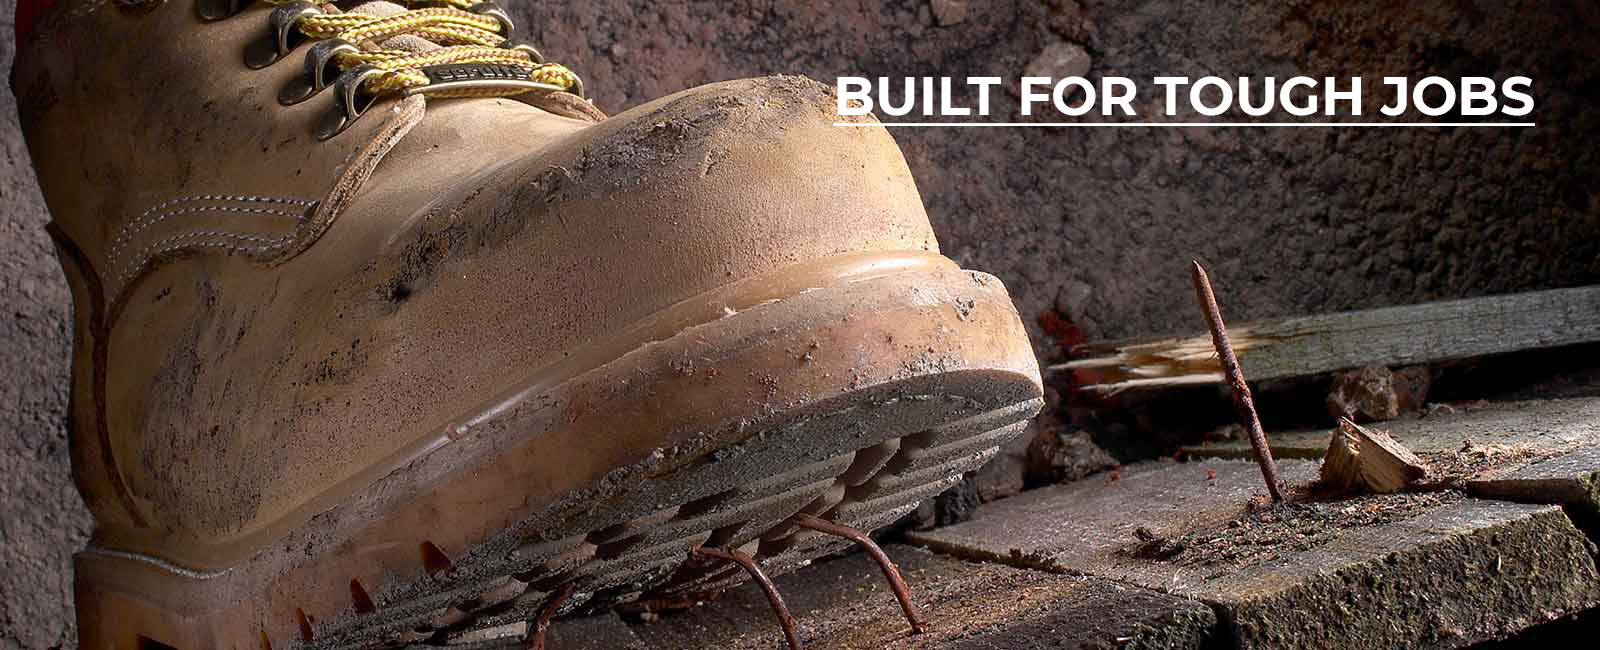 Safety Shoes Manufacturers/Suppliers/Dealers/Exporters in Mumbai